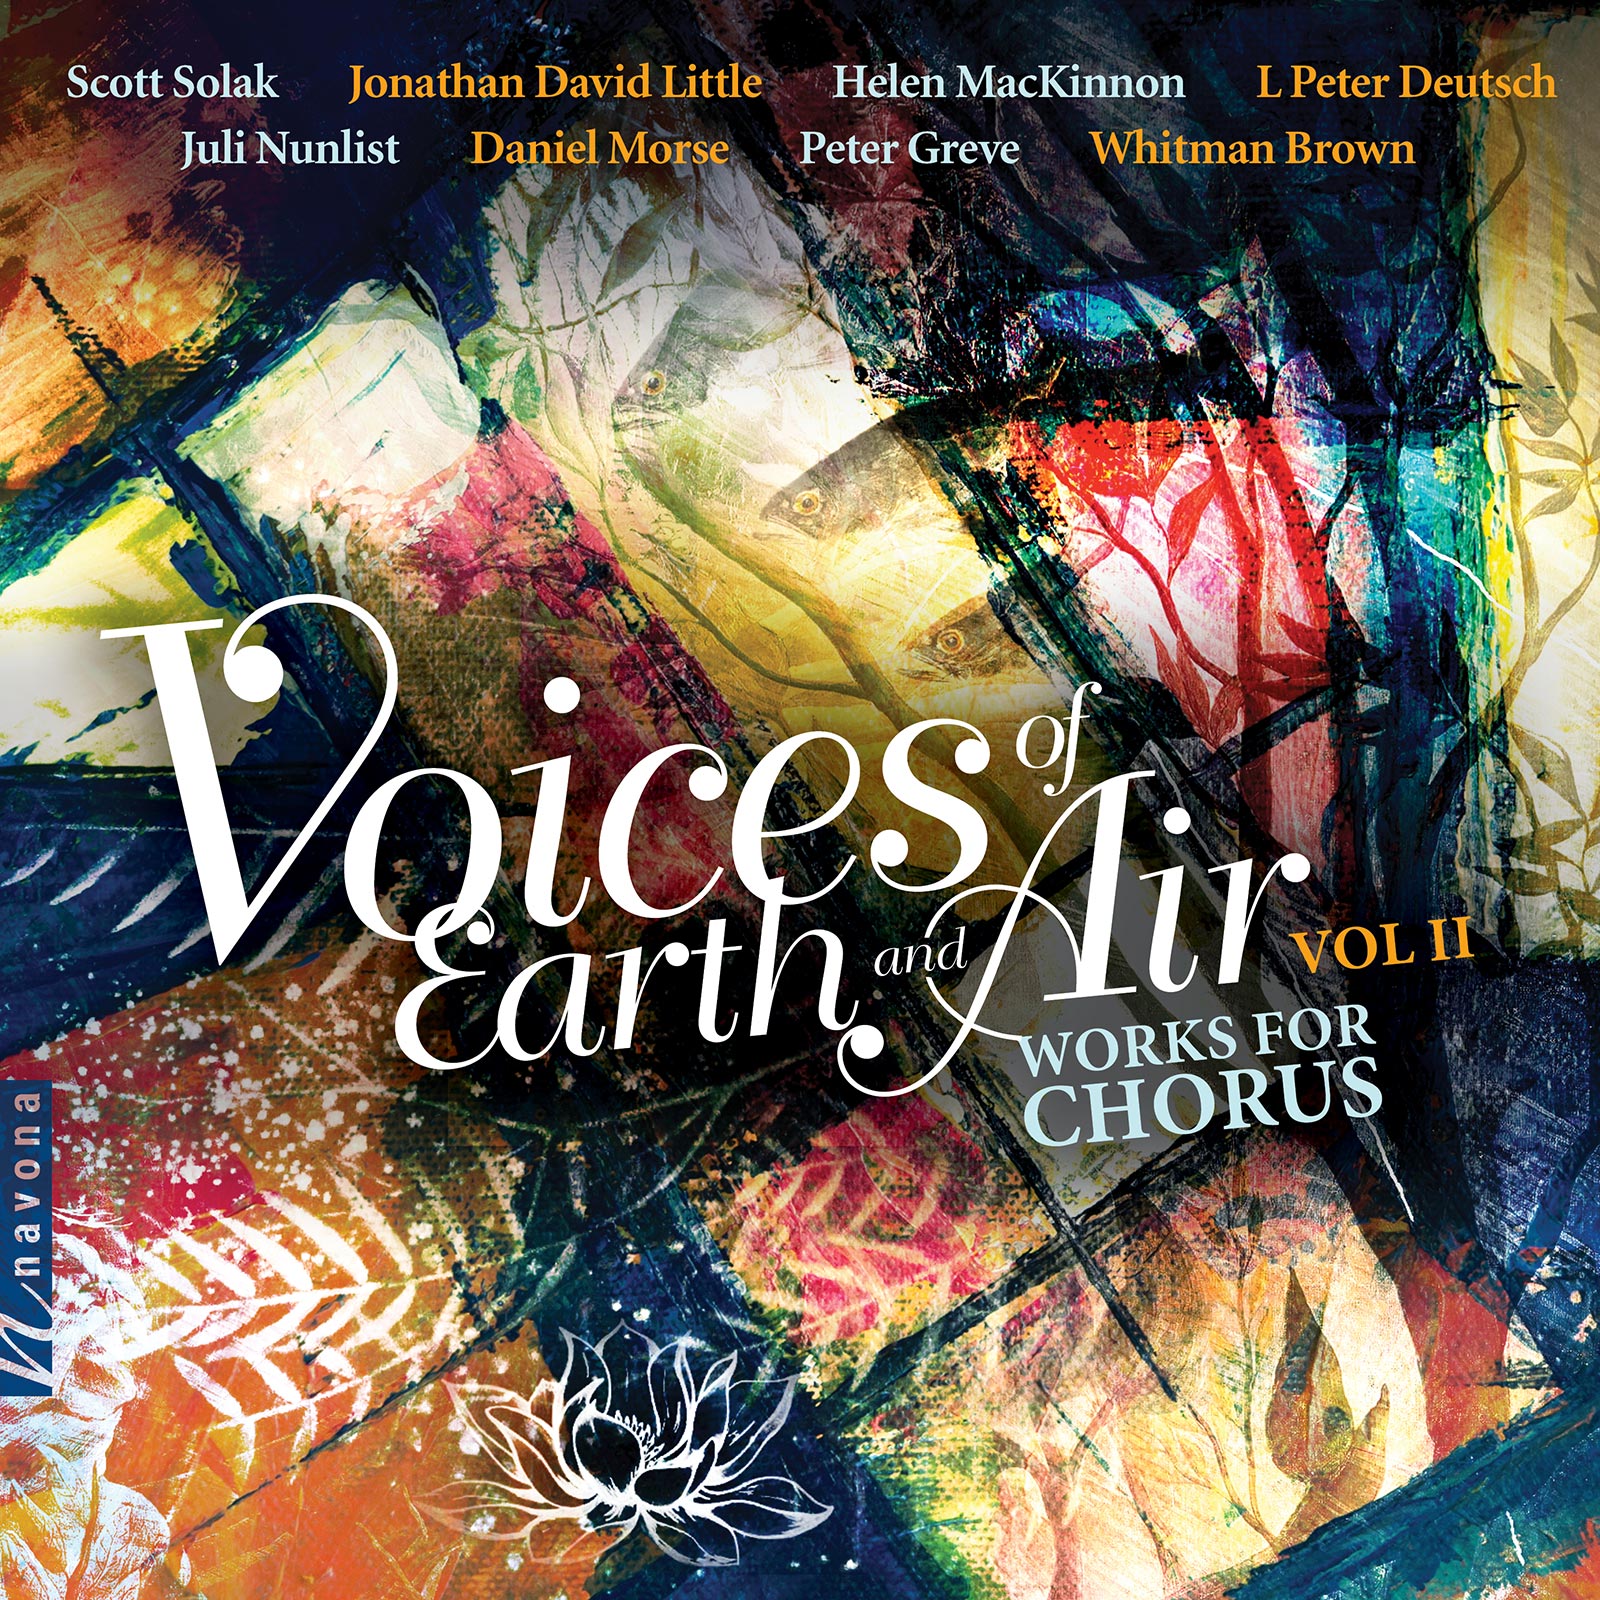 Voices of Earth and Air Vol II